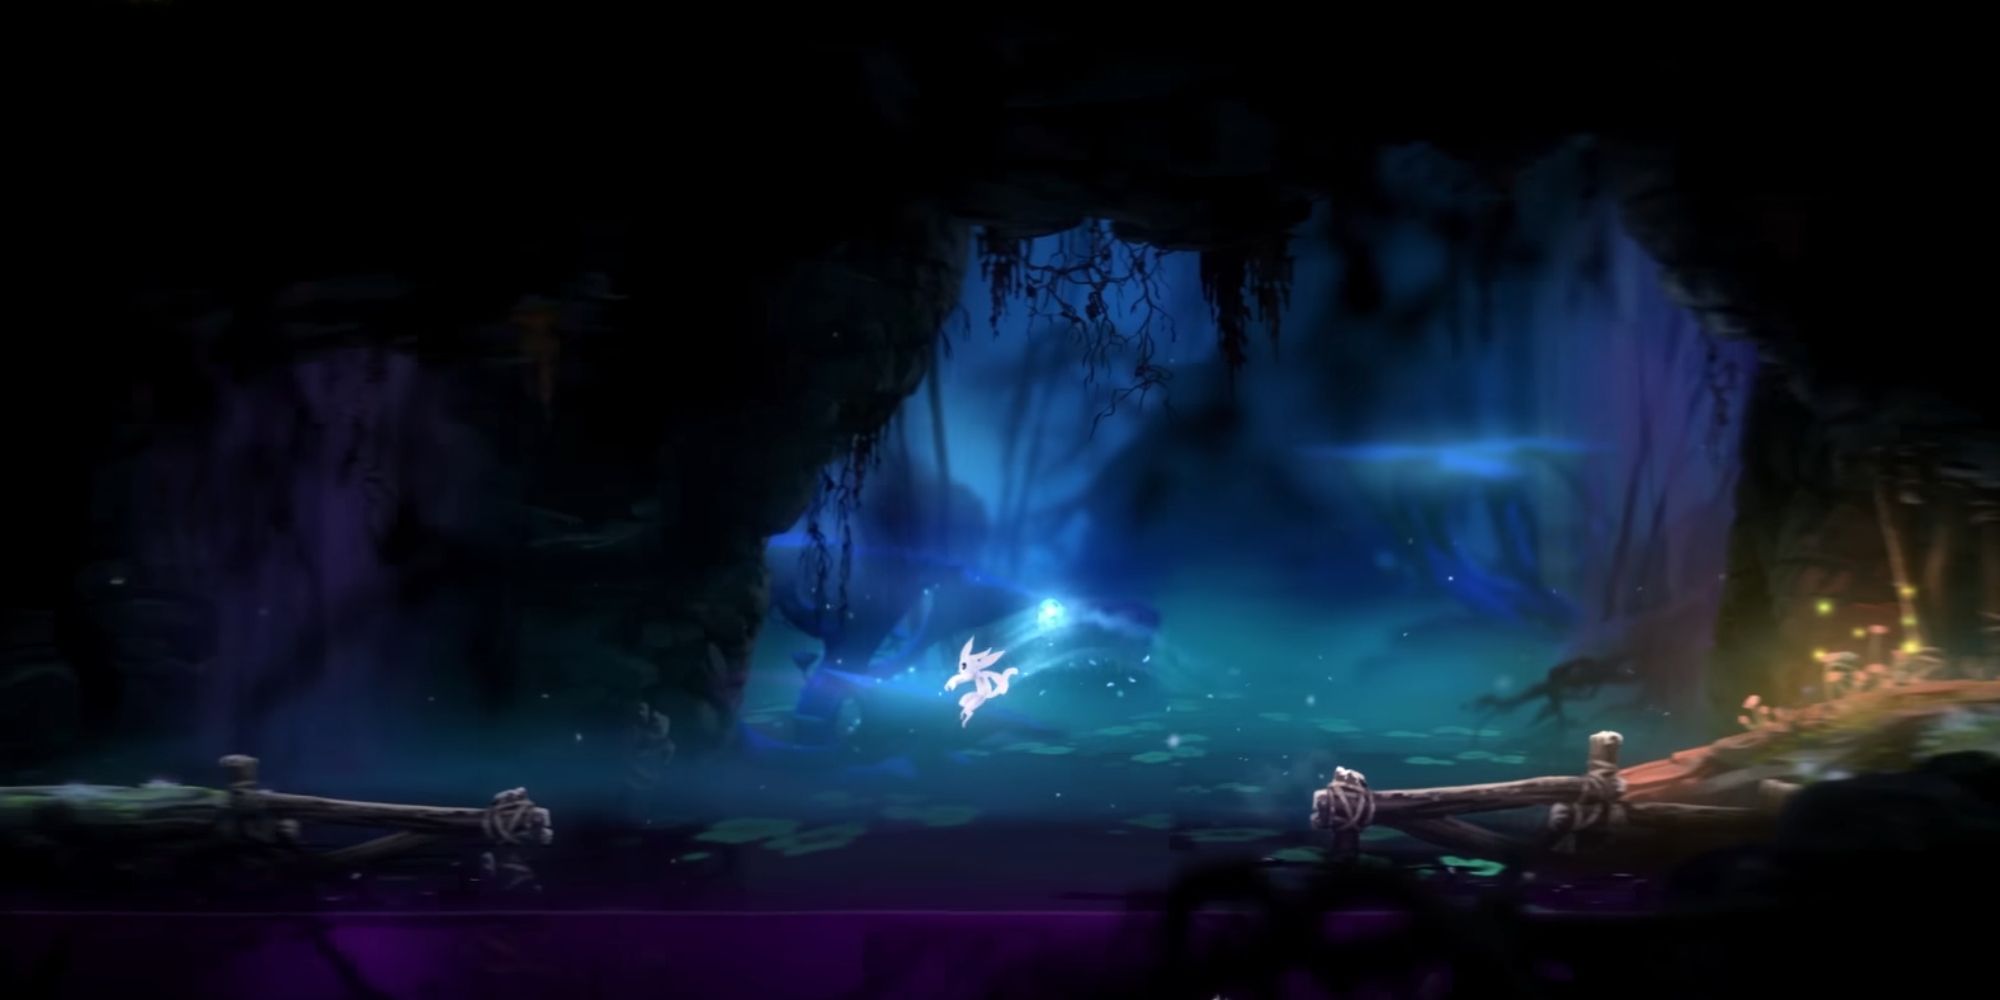 Ori leaps a swamp in the Blind Forest